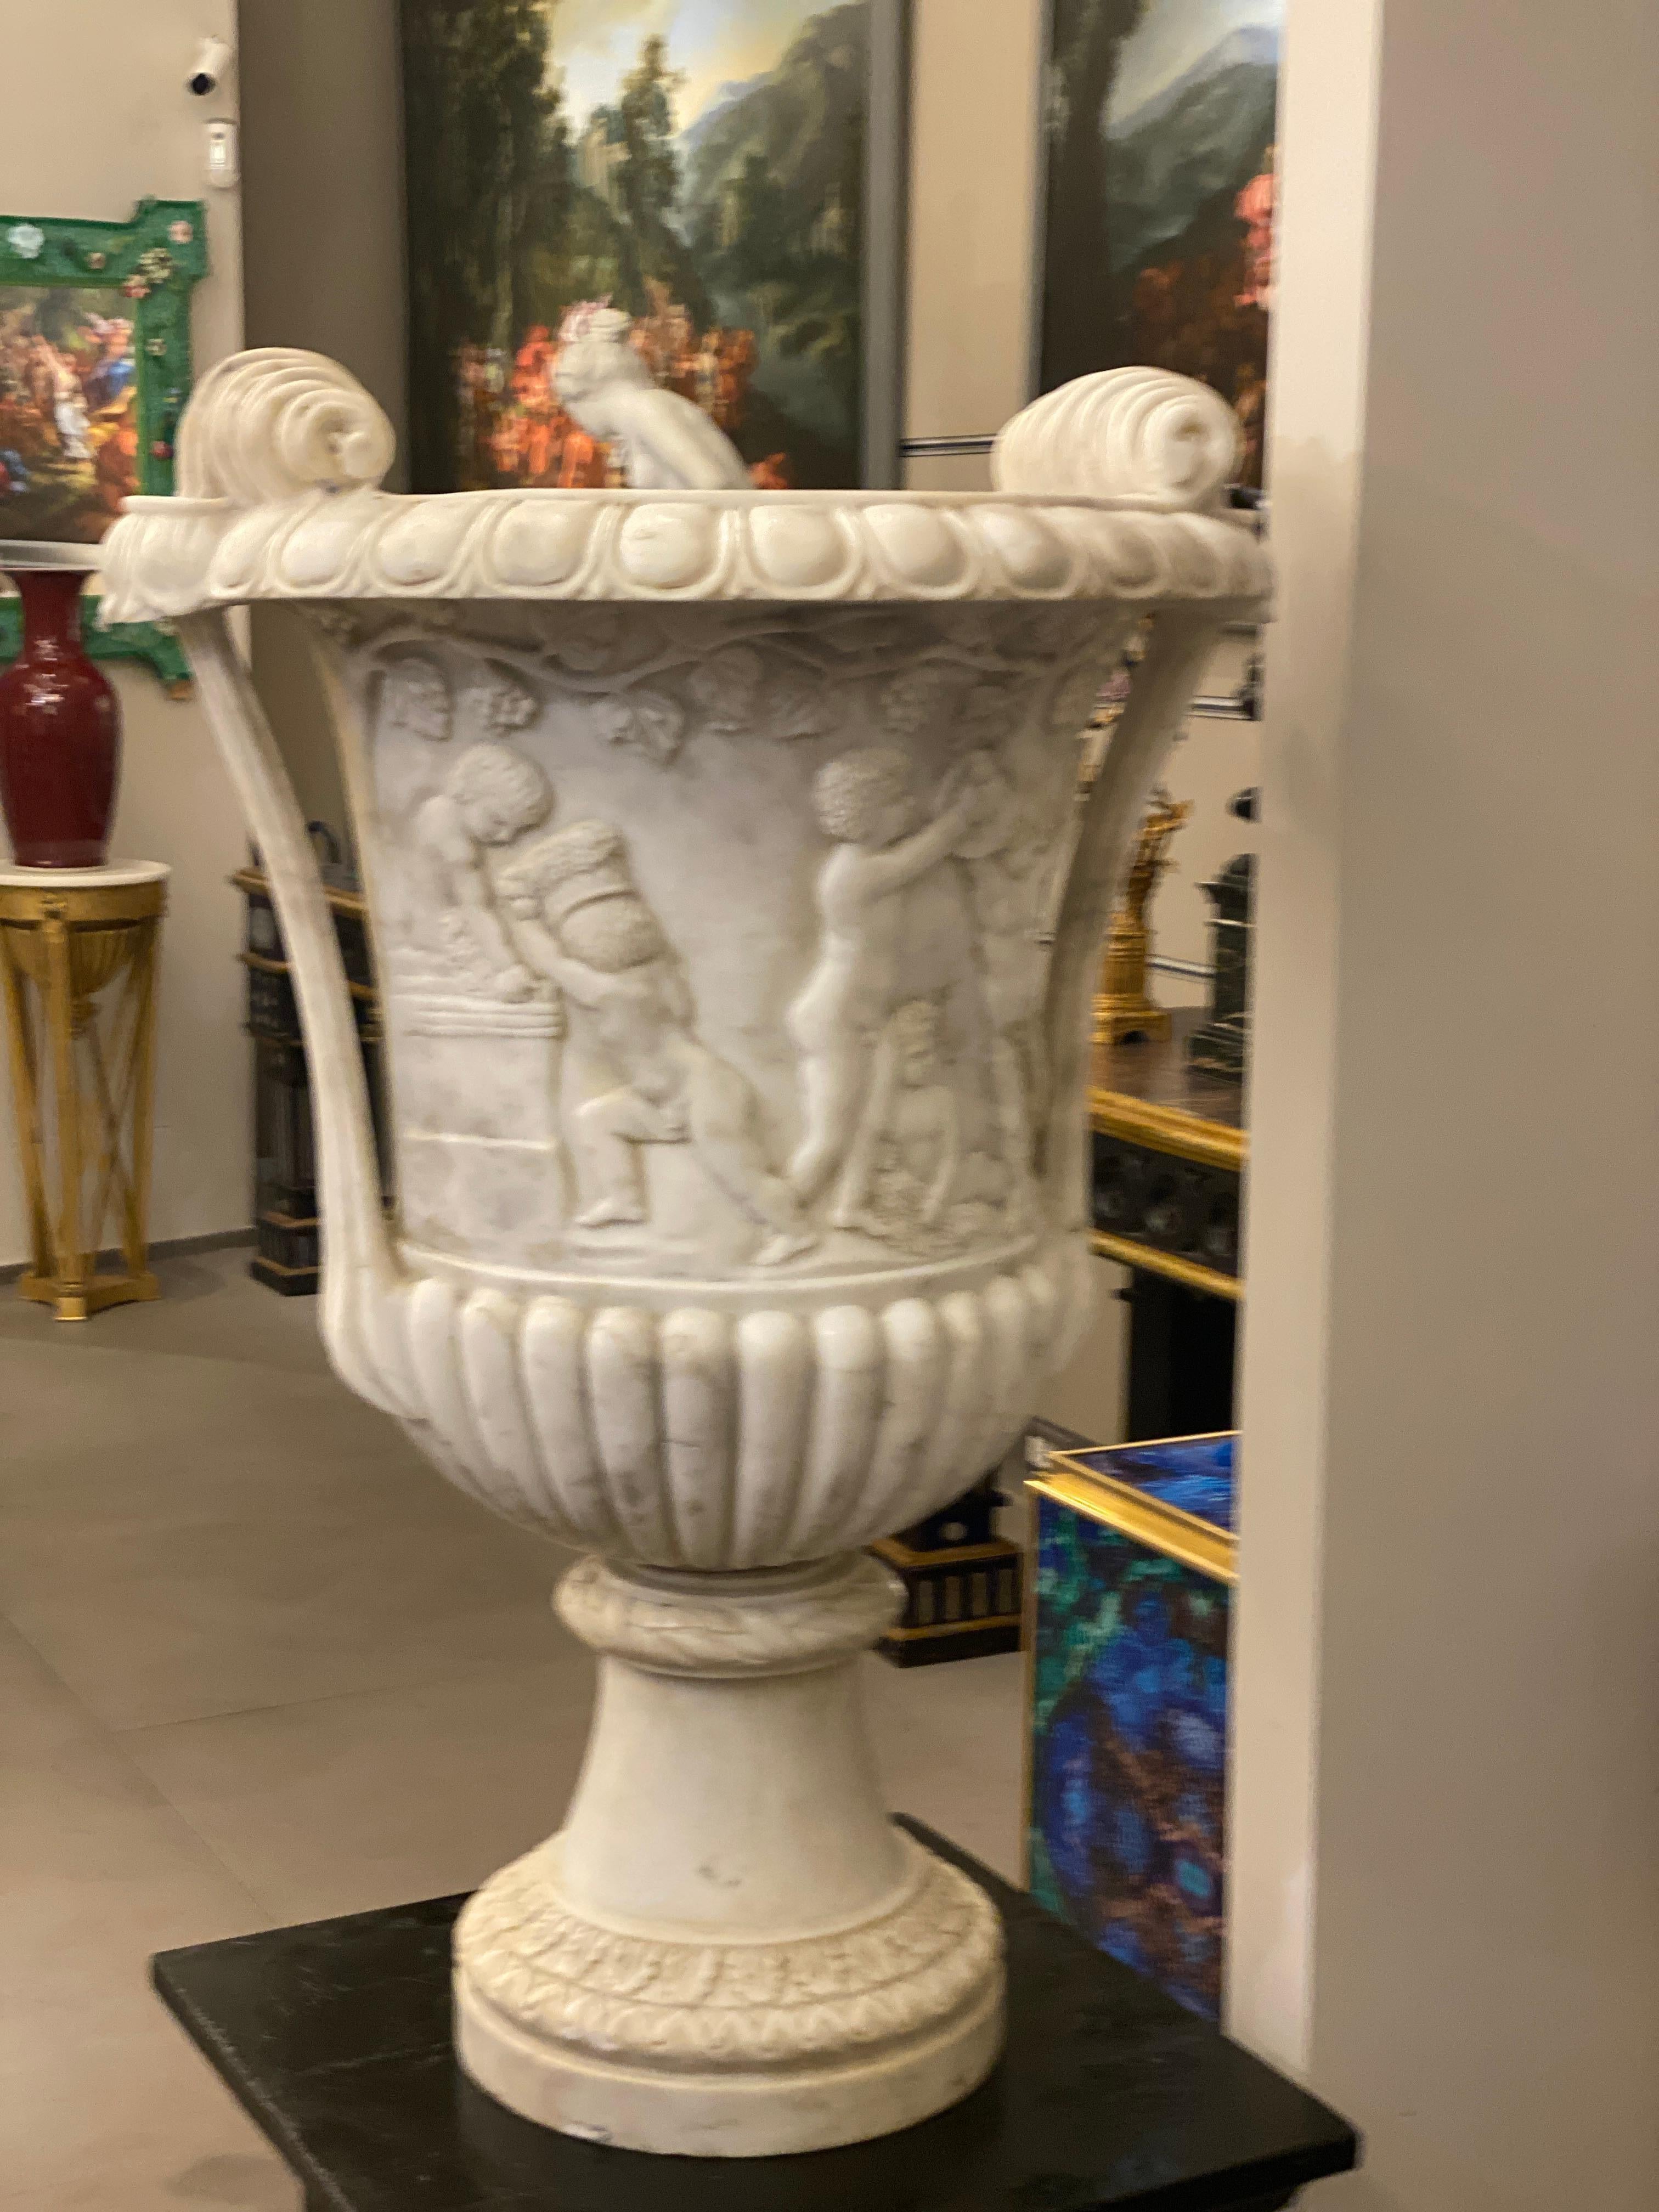 Exceptional  pair of vases in the shape of a cantharus.
 From a foot with overlapping moldings like strips, woven ribbons and acanthus leaves, a smooth stem rises, tapering towards the top, with a crown knot of laurel leaves tied by ribbons. It has